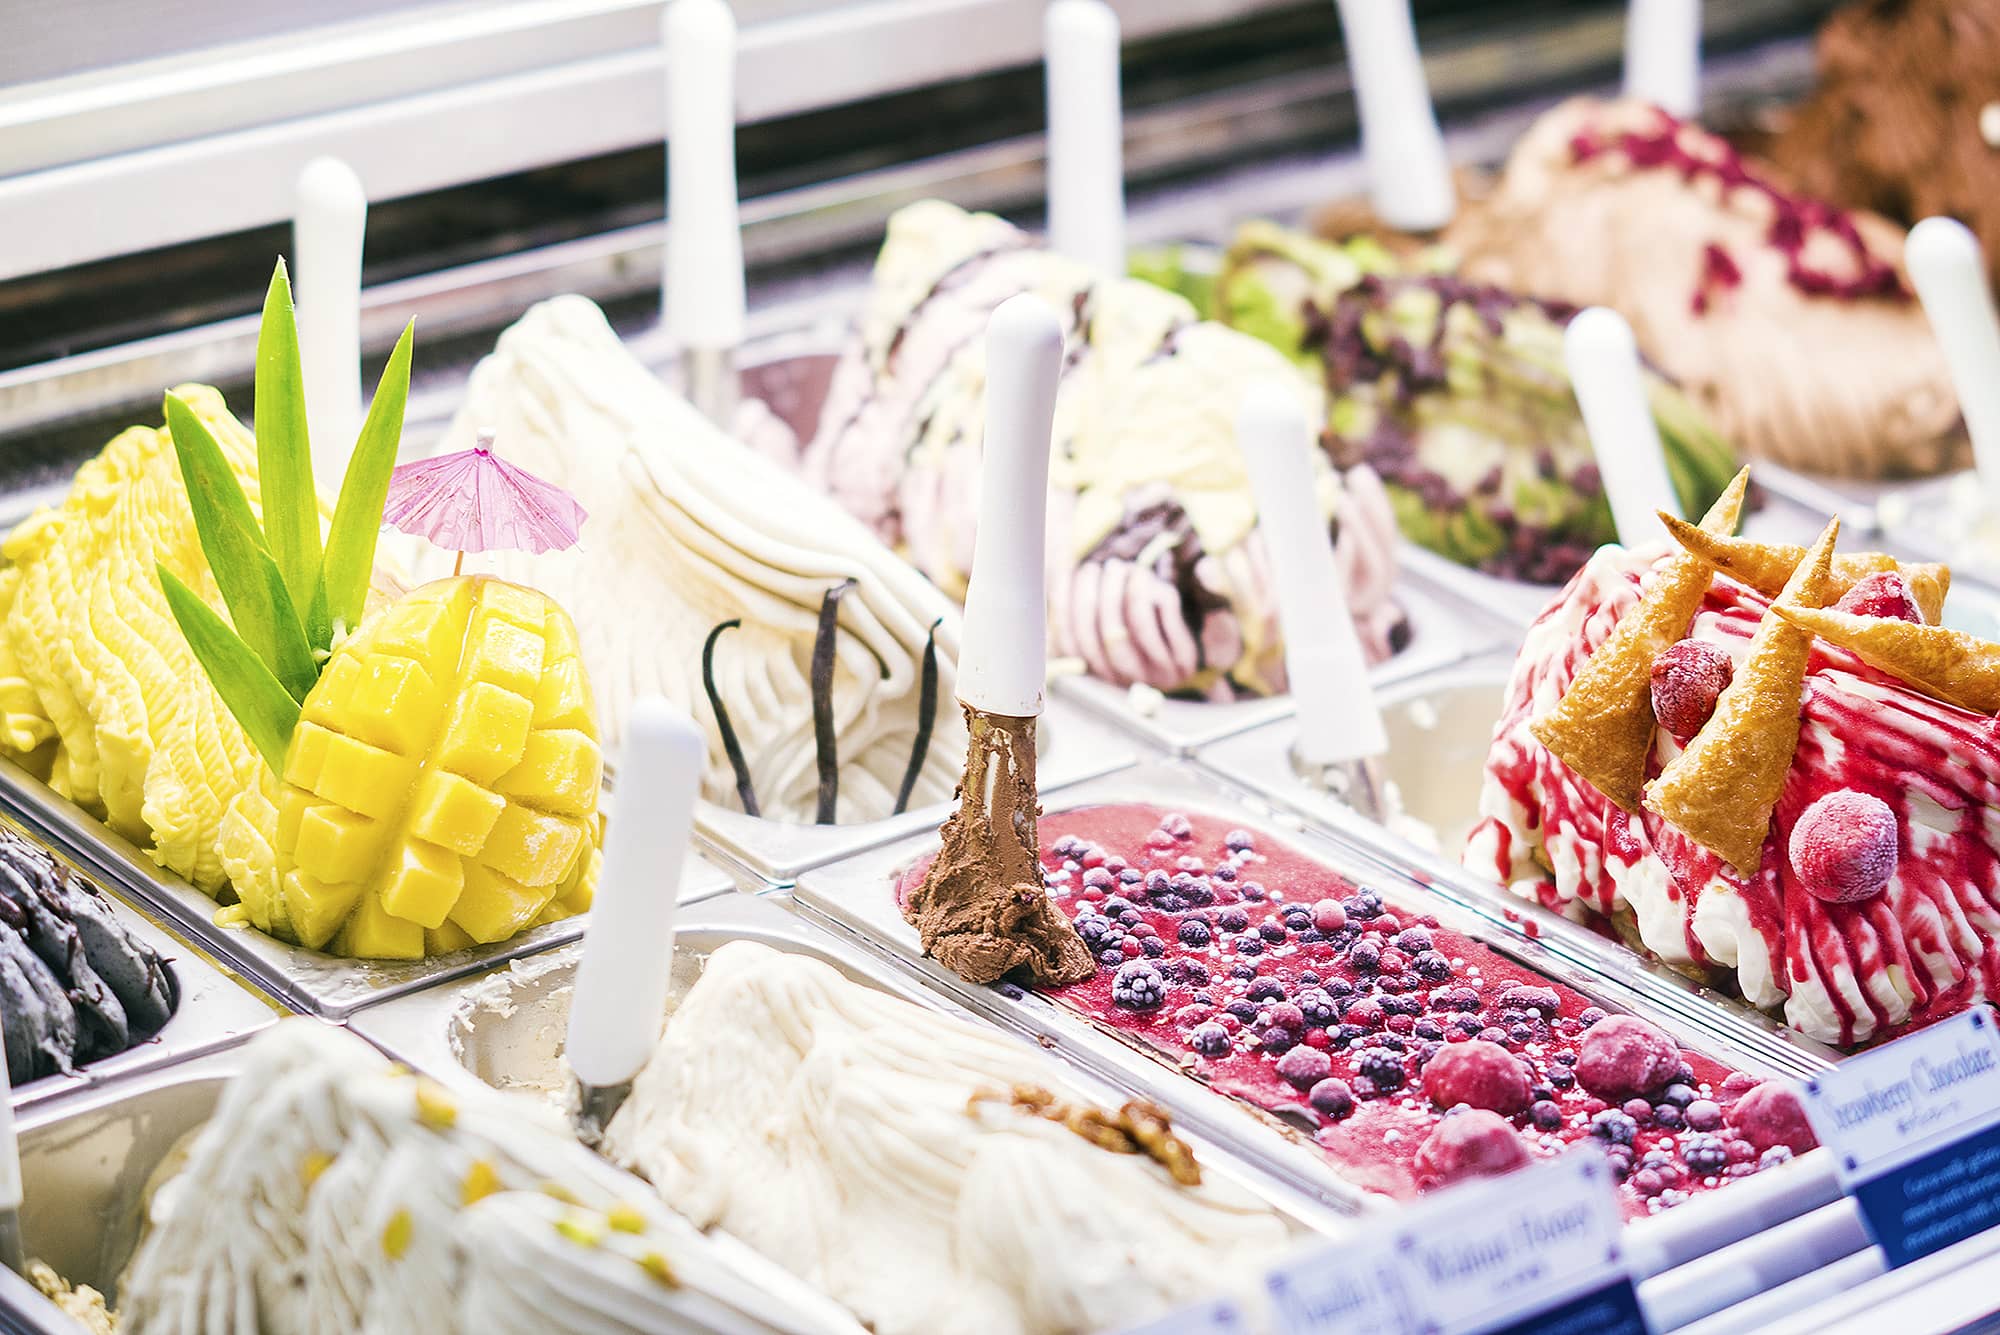 Many colorful flavors of gelato on display in Italy